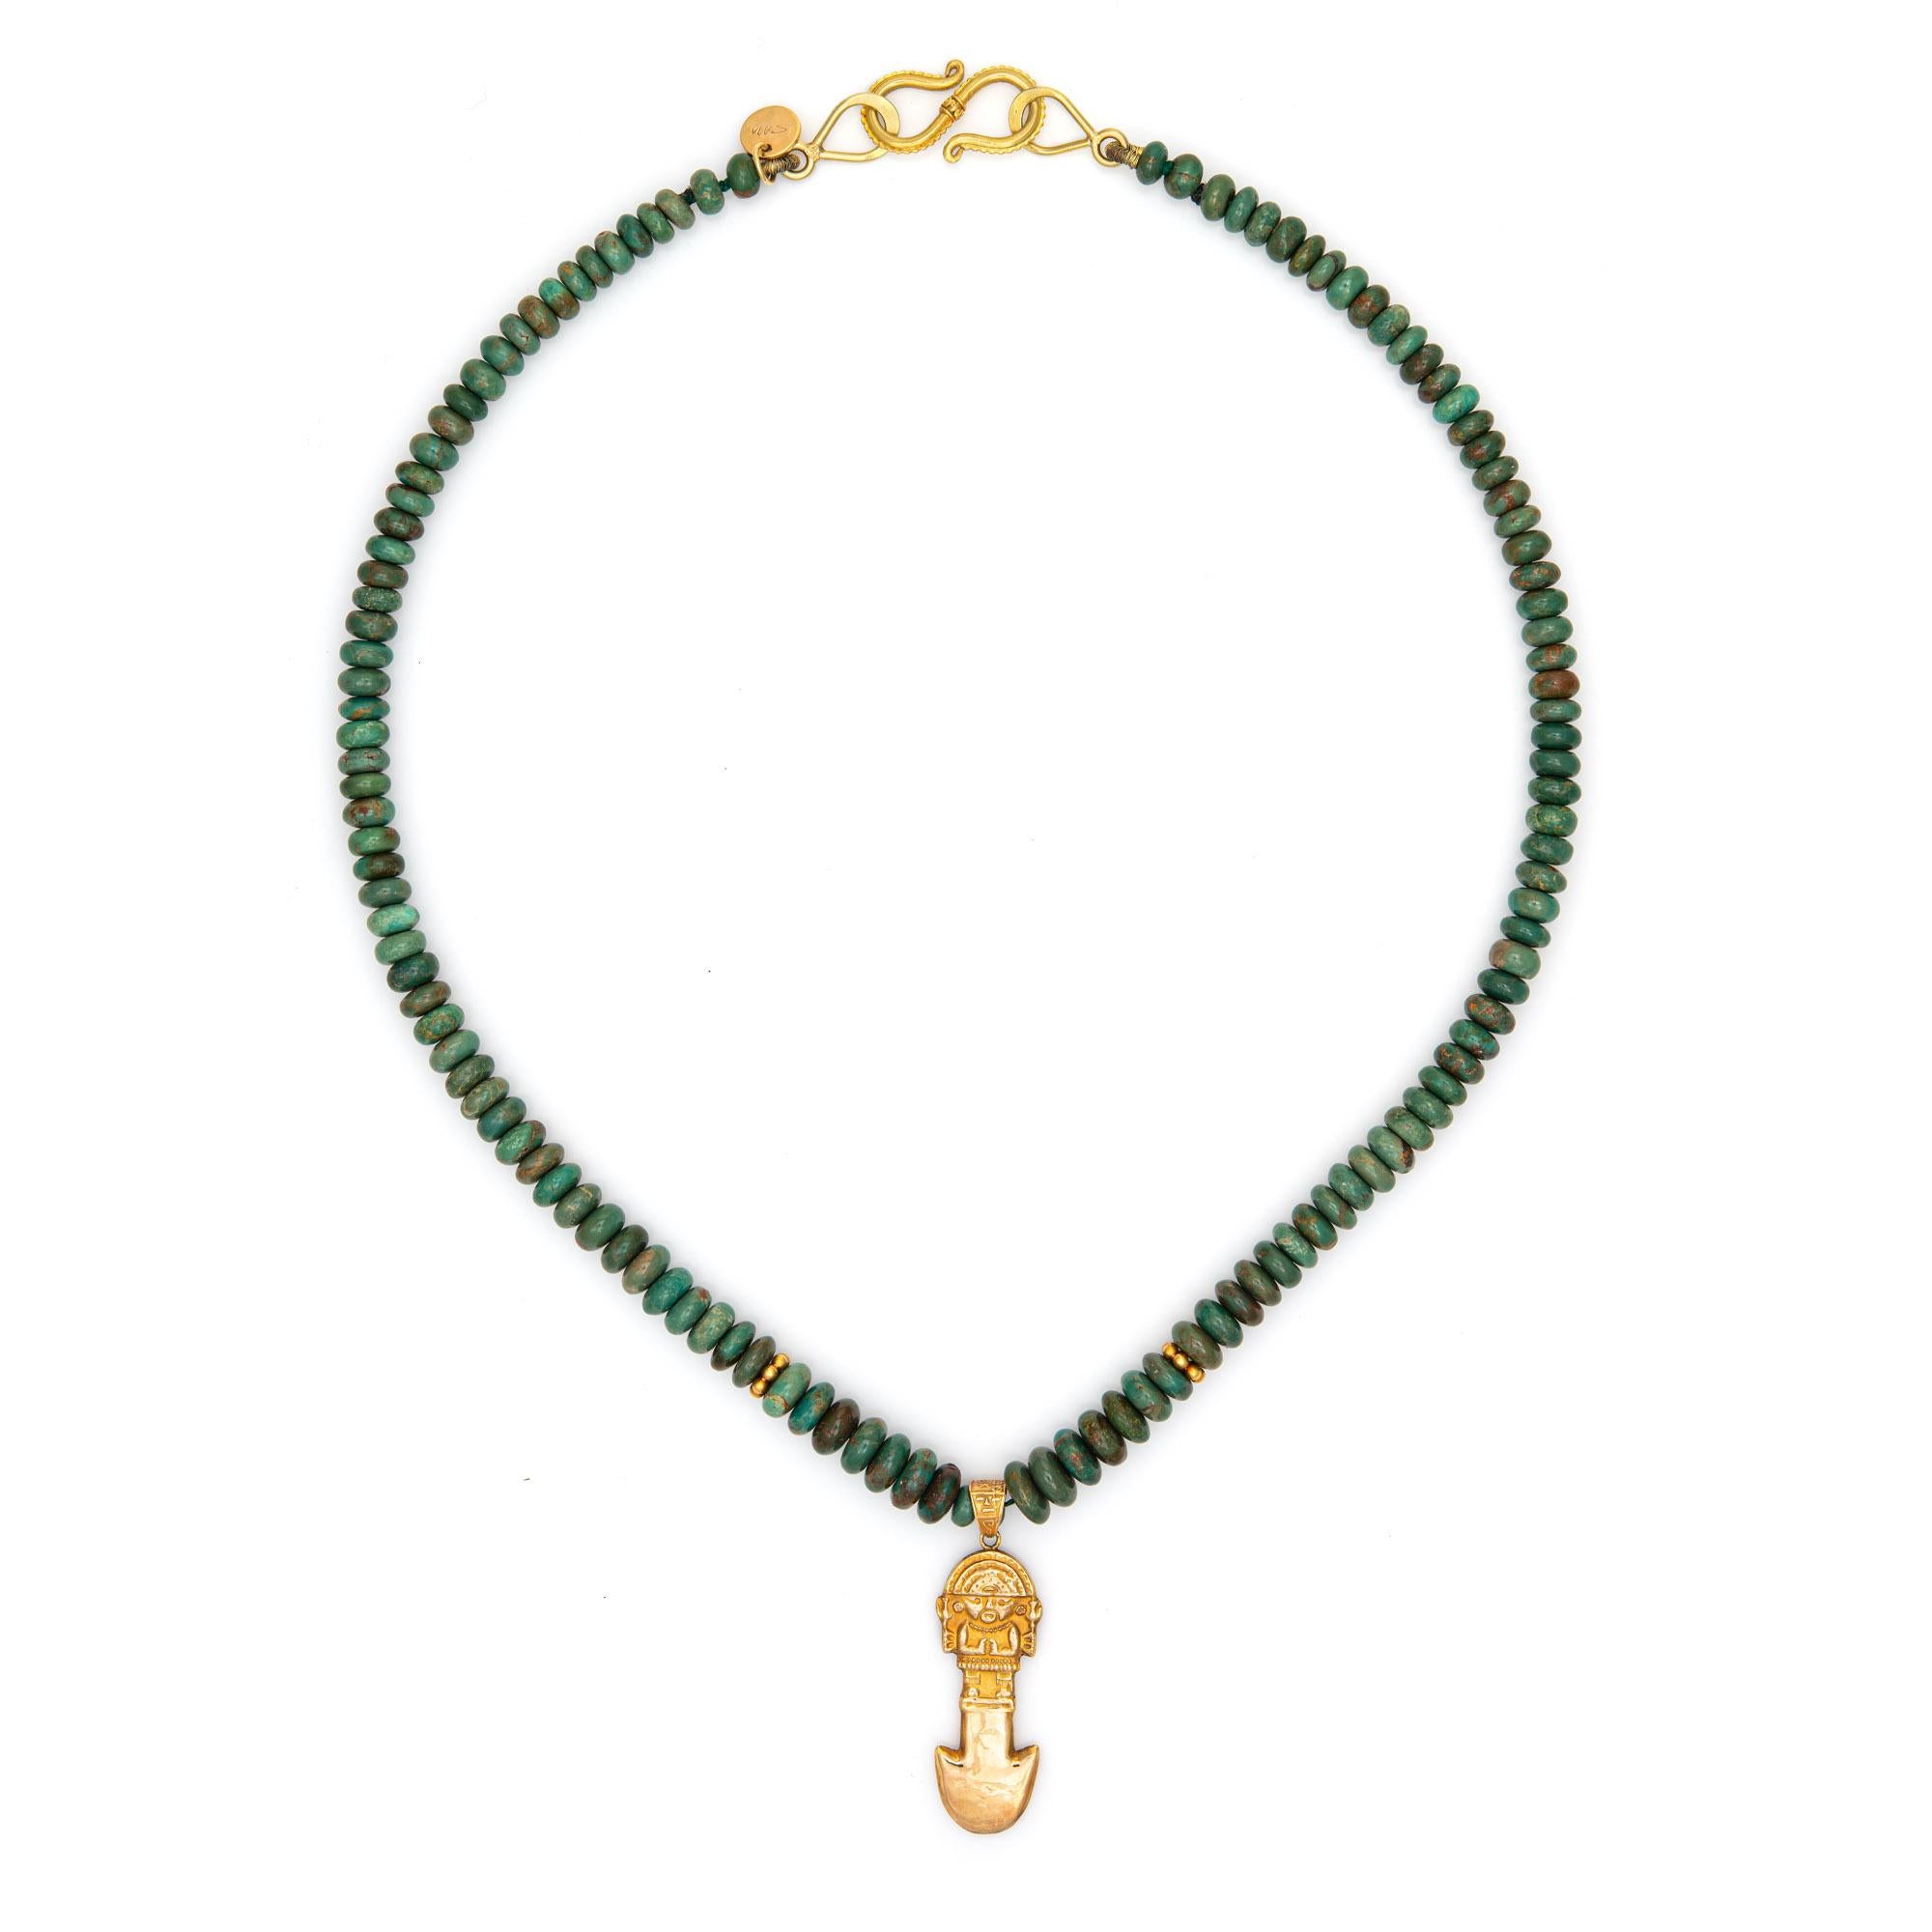 Stylish and finely detailed vintage Aztec necklace crafted in 18 karat yellow gold. 

The necklace features turquoise beads strung onto an 18 1/2 inch strand. The Aztec pendant drop features a double sided design. 18k gold rondels along with an 'S'